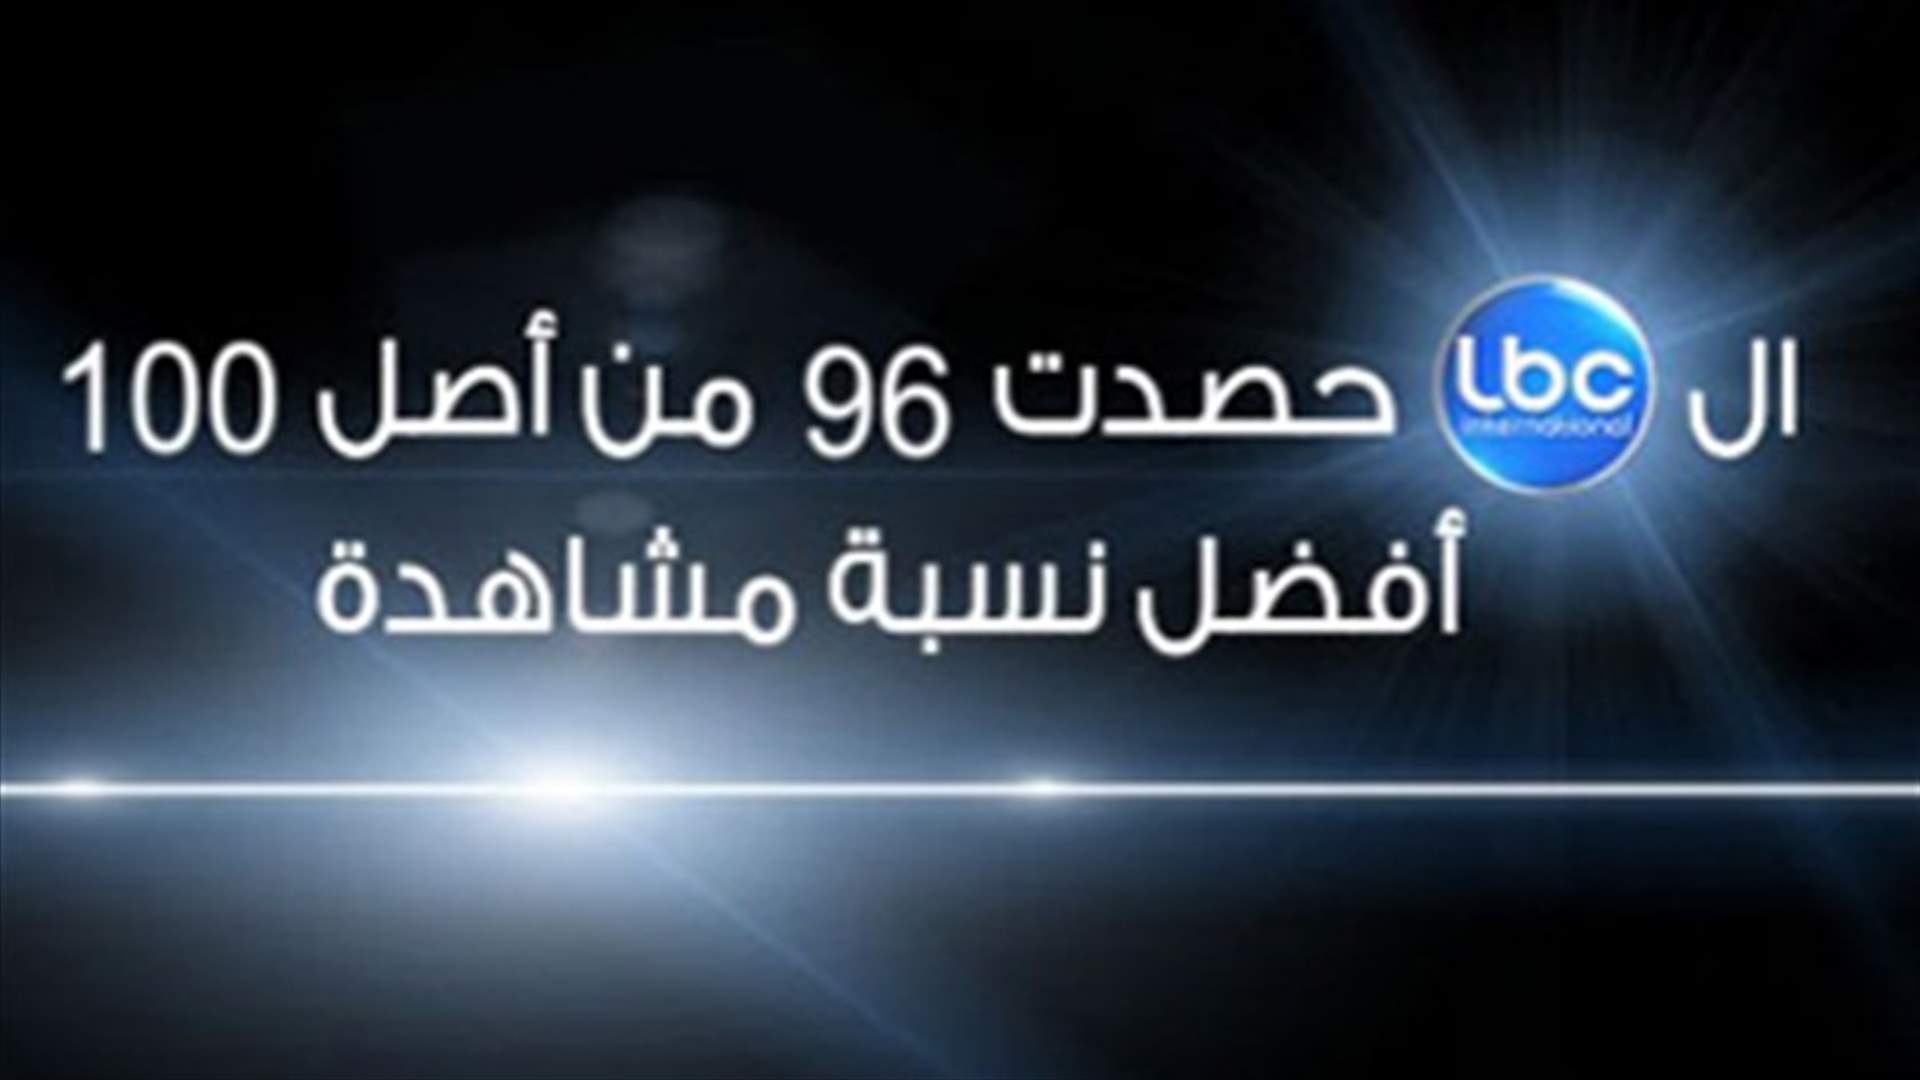 LBCI rates as the most-watched TV channel in Lebanon during 2012